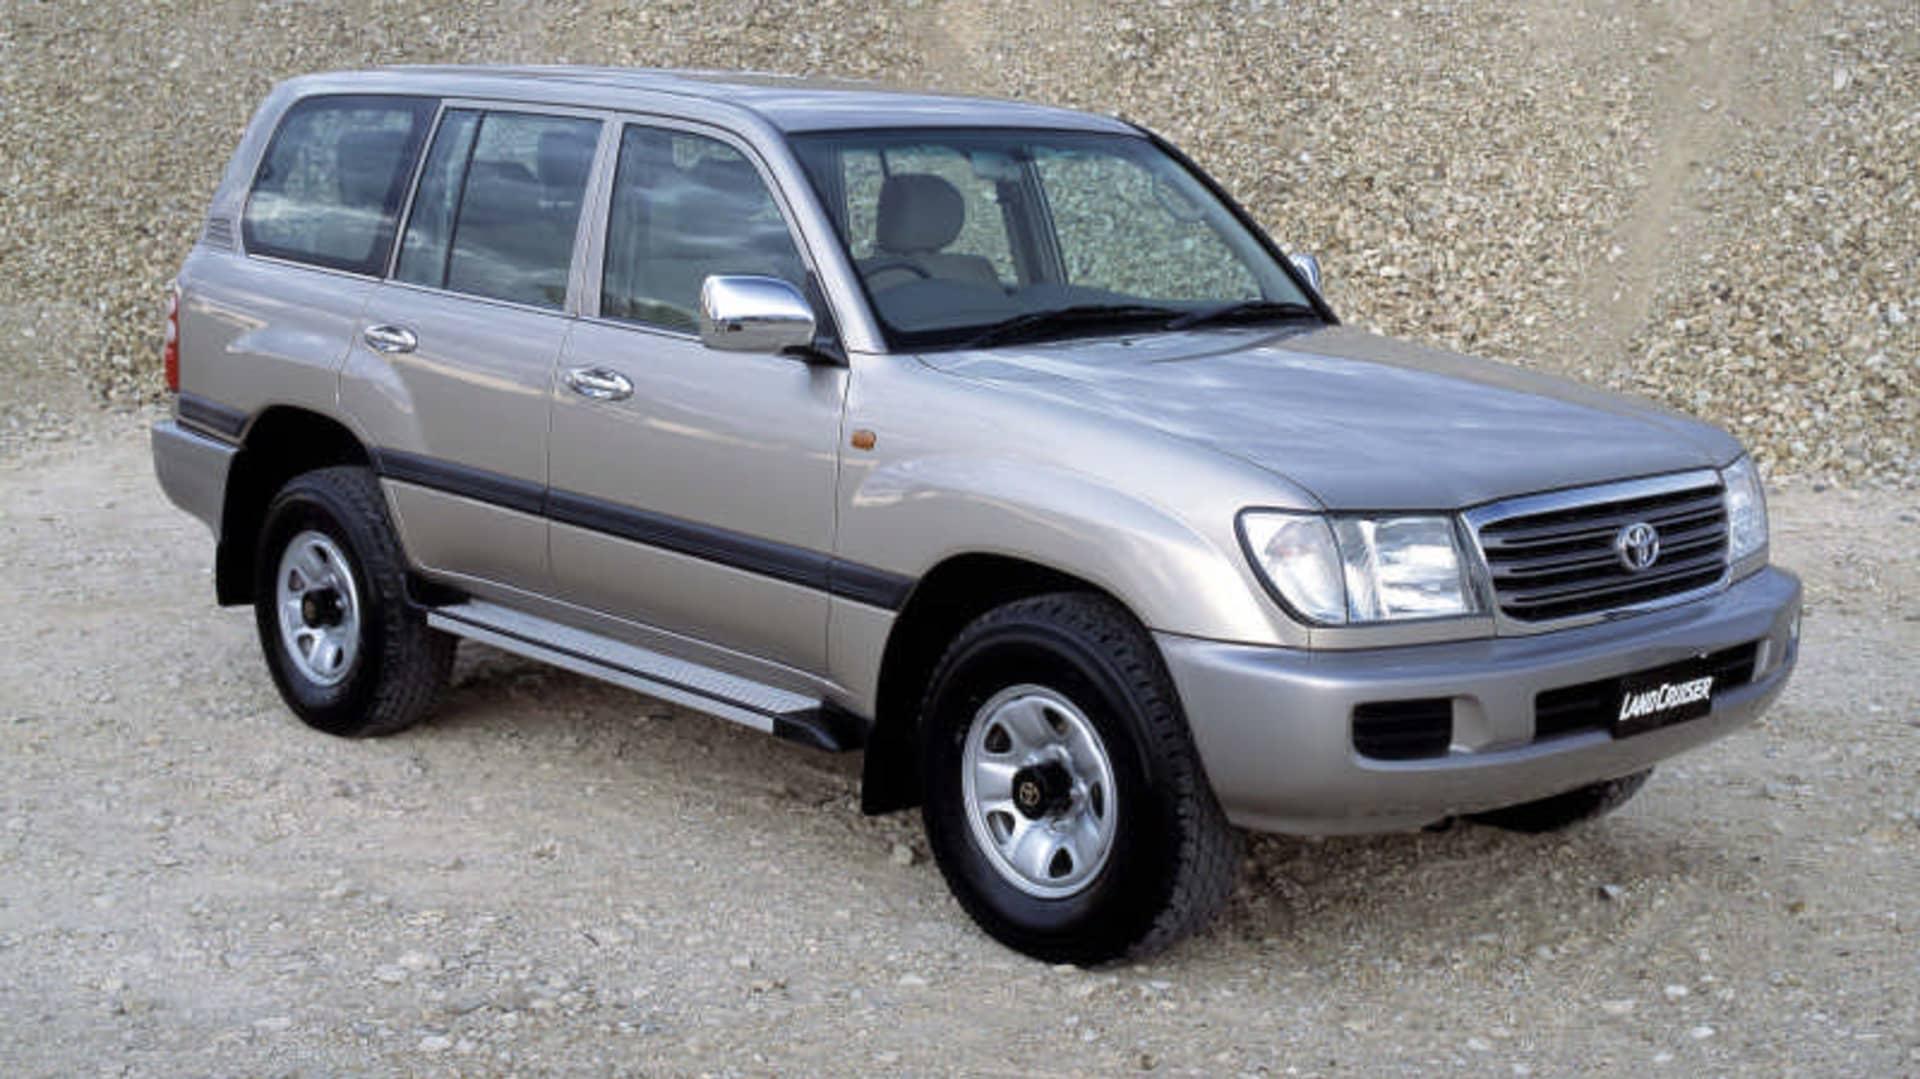 Toyota Landcruiser Series And Recalled For Airbag Issue